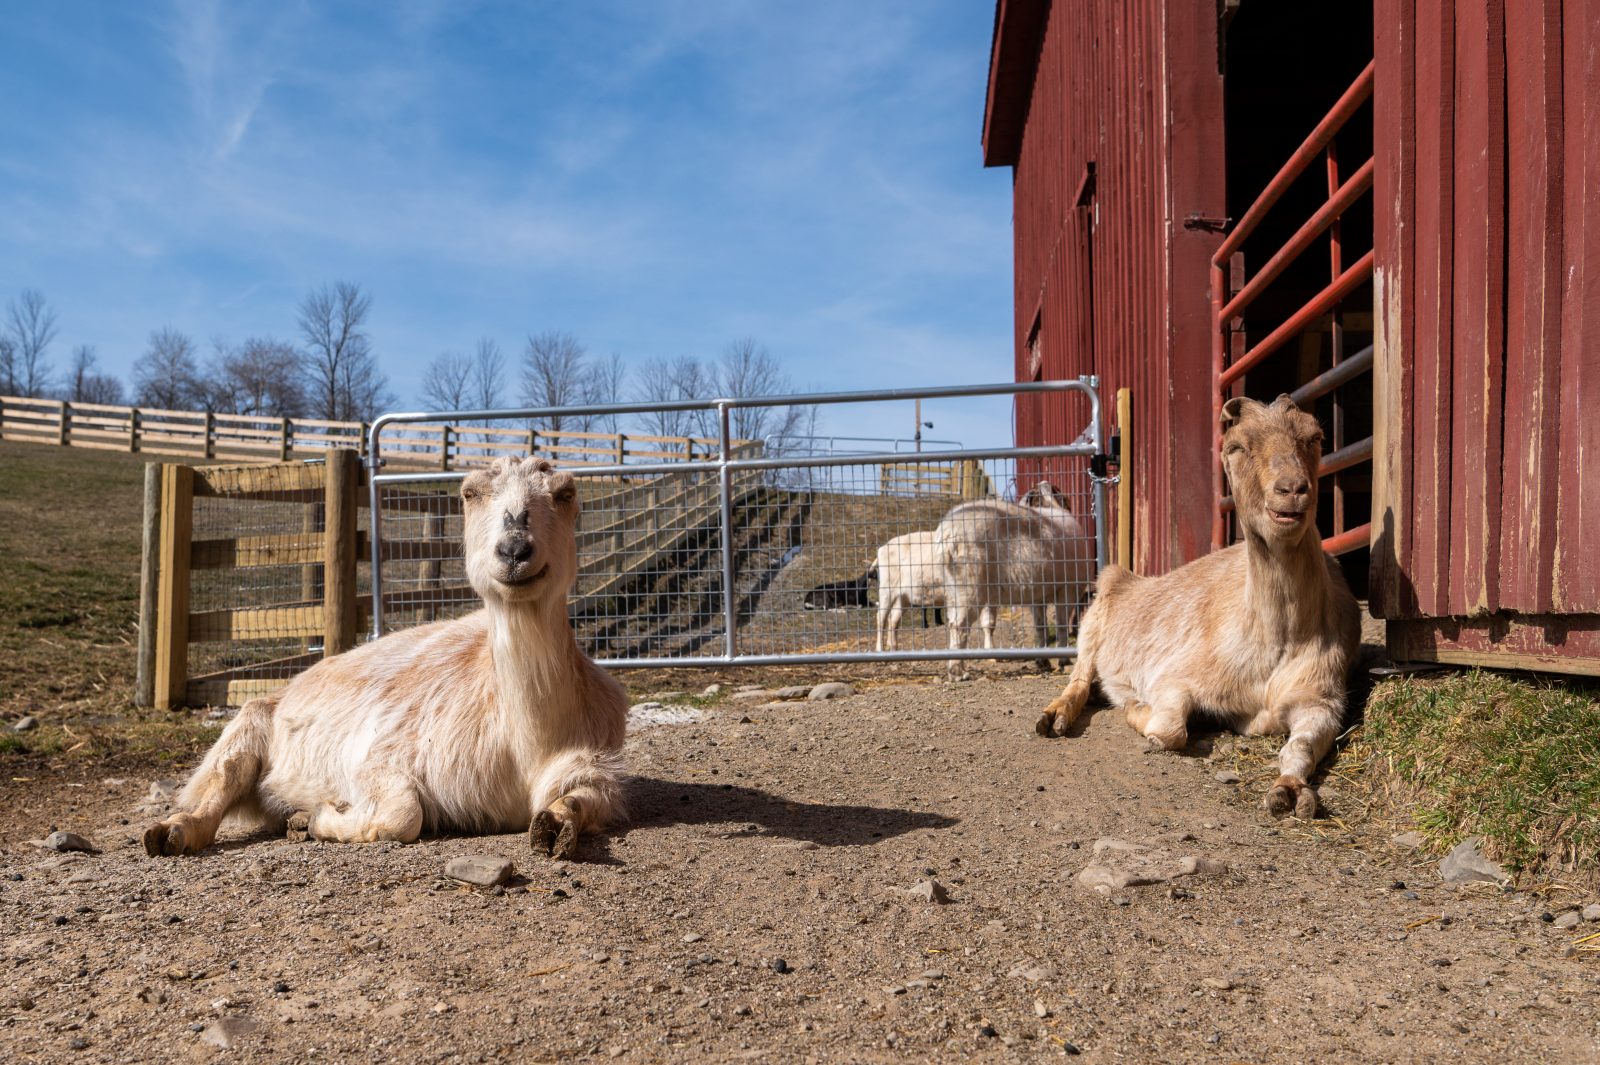 Cynthia and Bruce at Farm Sanctuary's New York shelter